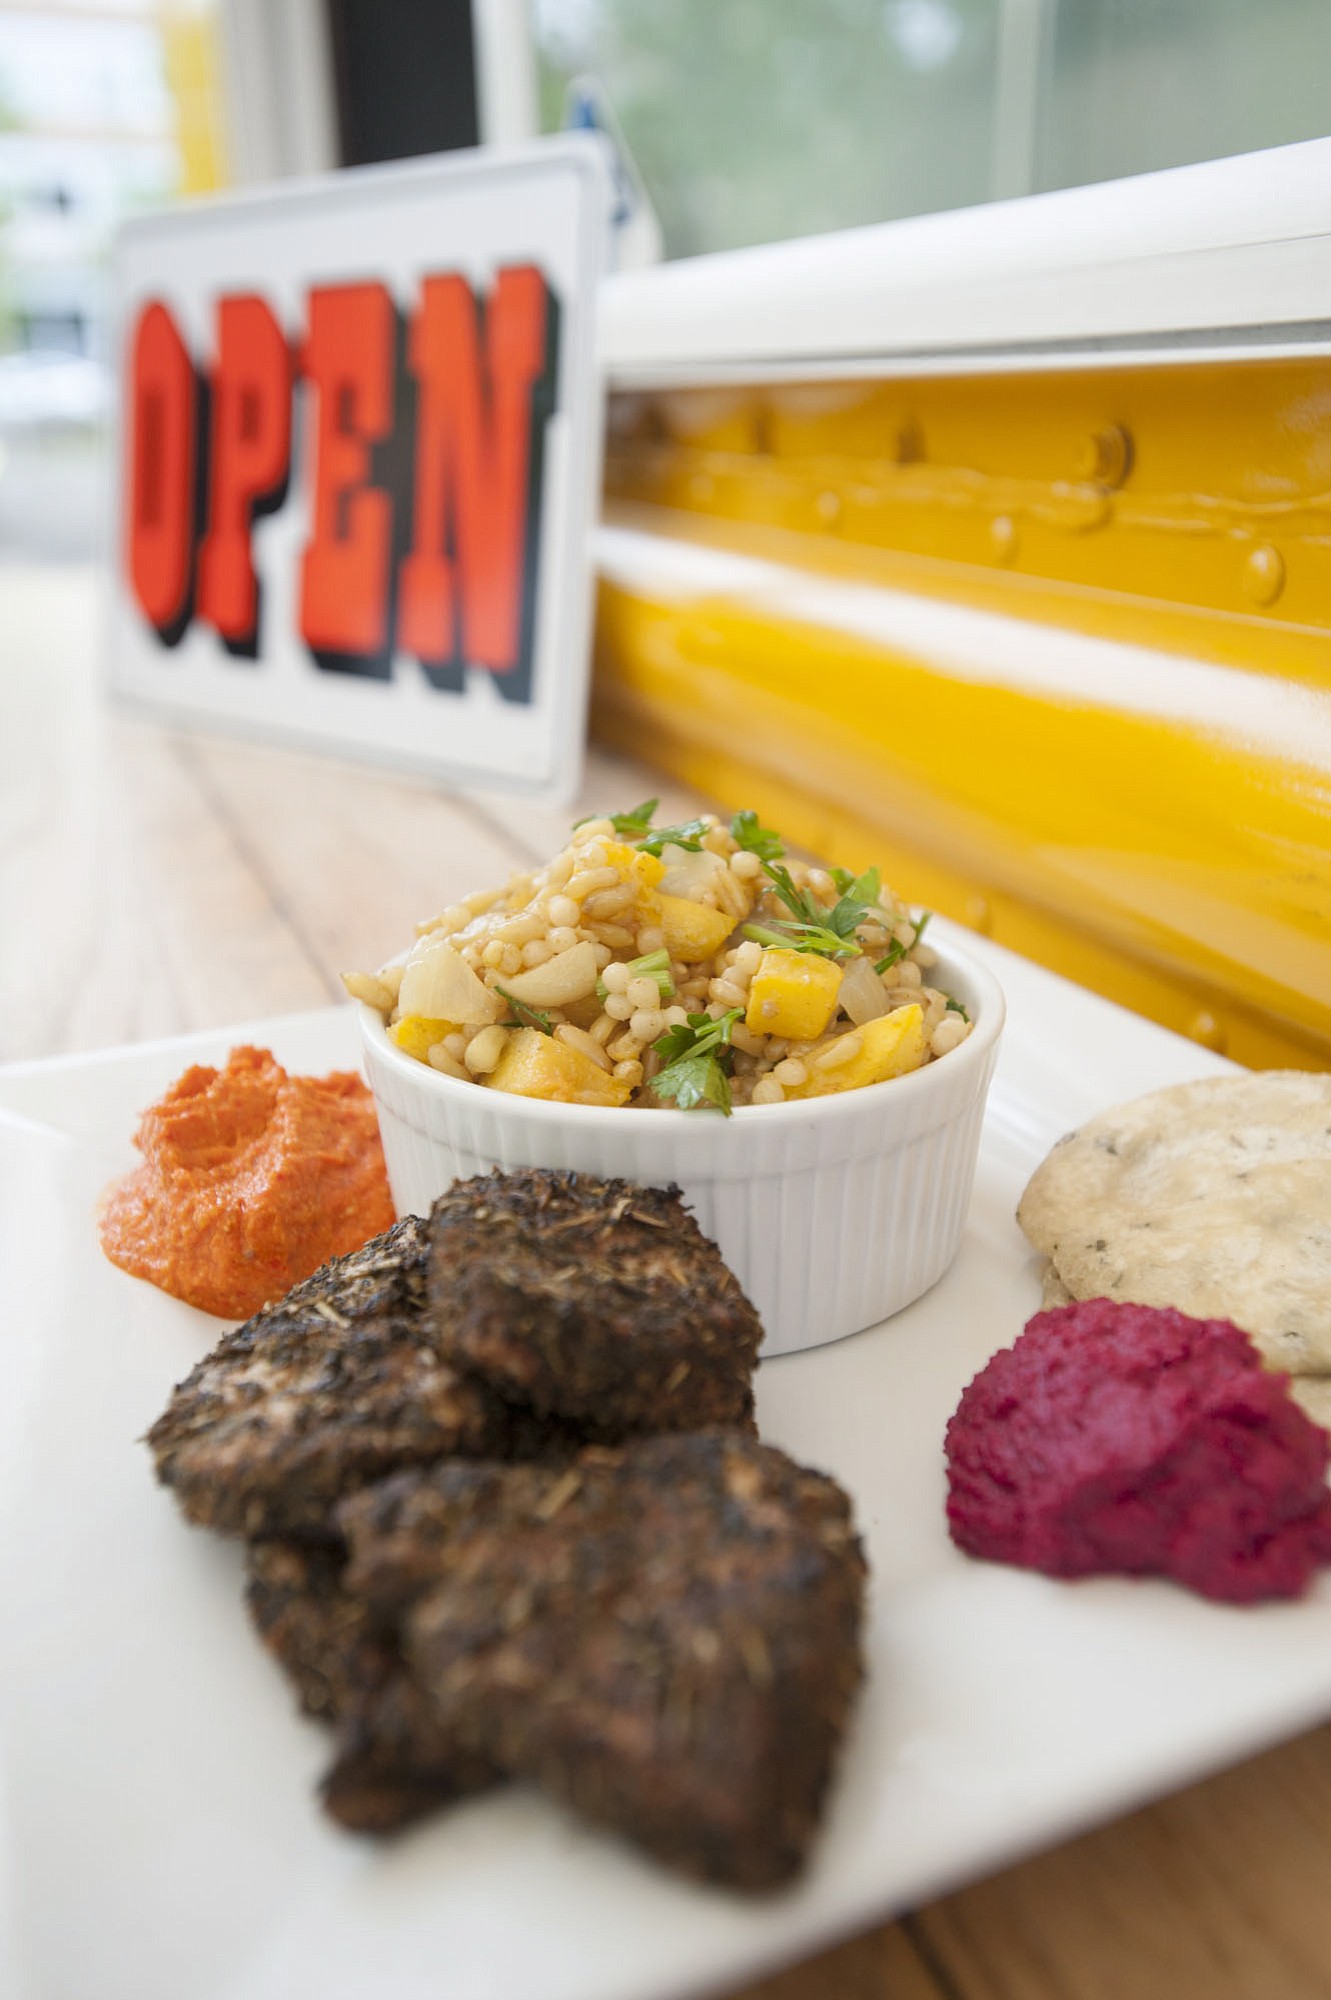 A plate of roasted beet hummus, grilled chicken with kamut (in the bowl) with roasted red pepper and almond sauce is served April 23 at Ingrid's Goodstreetfood truck in Vancouver.